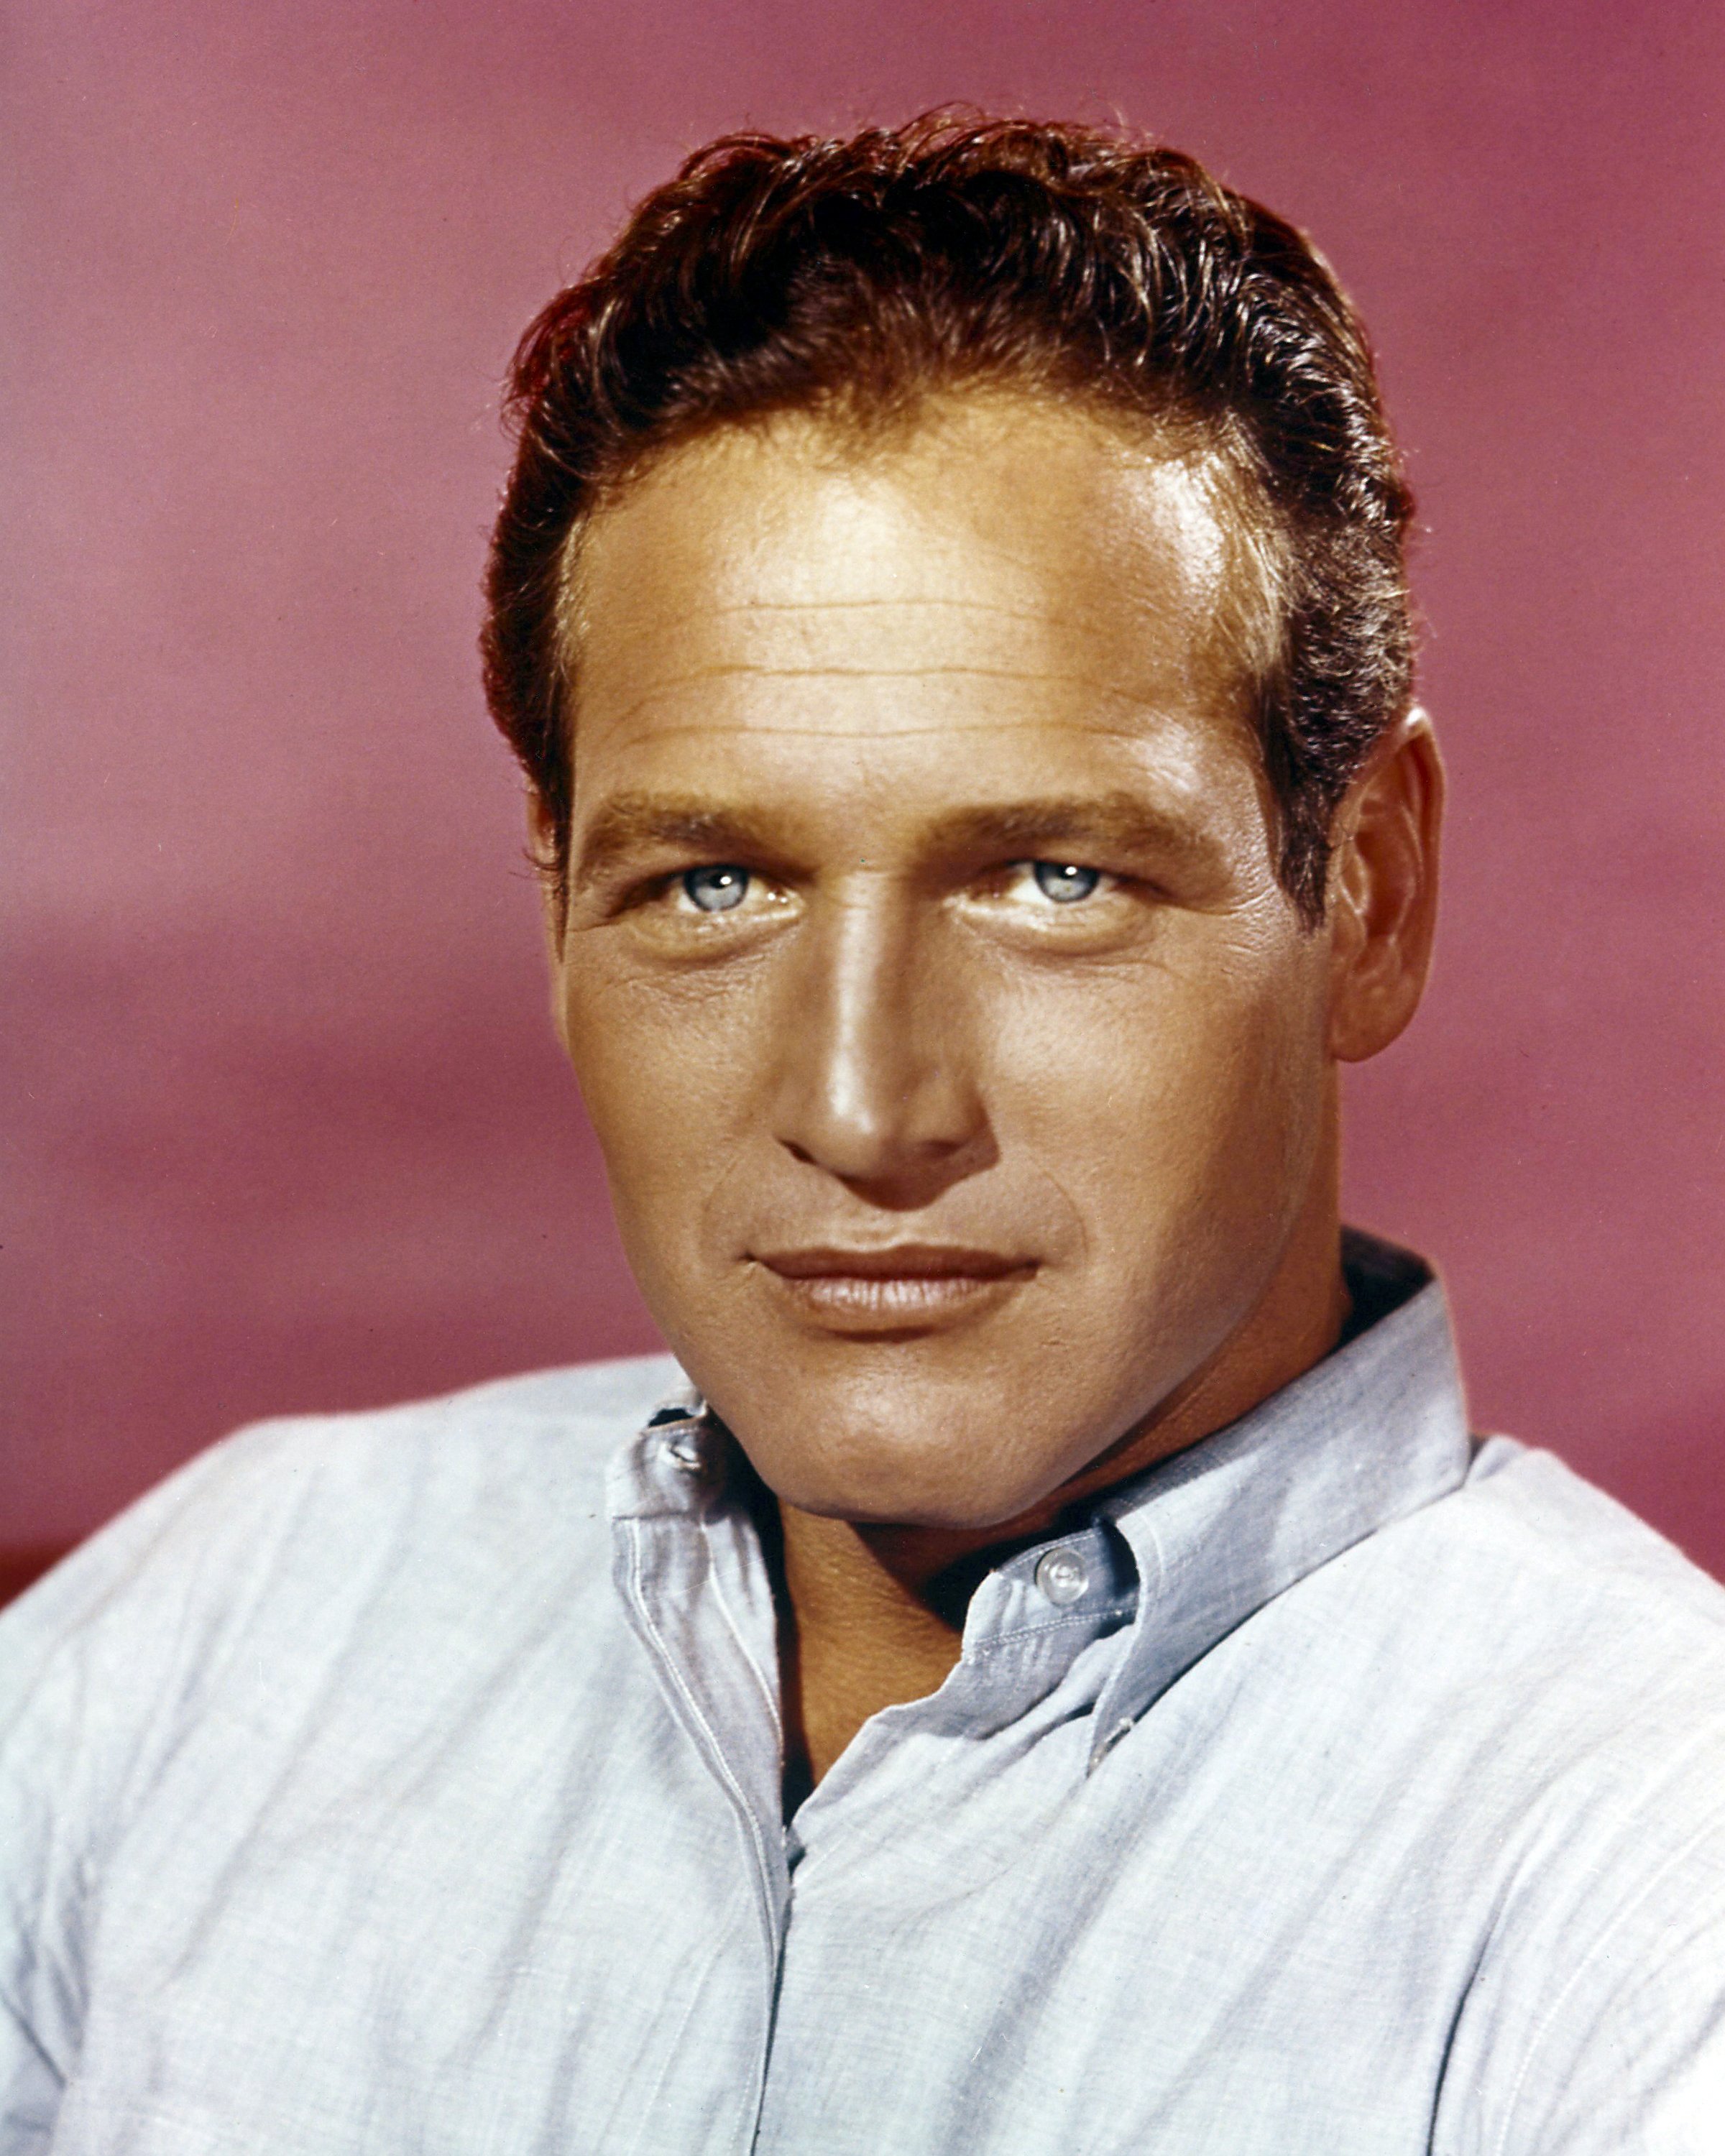 Paul Newman poses against a pale red background in the 1960s | Photo: Getty Images